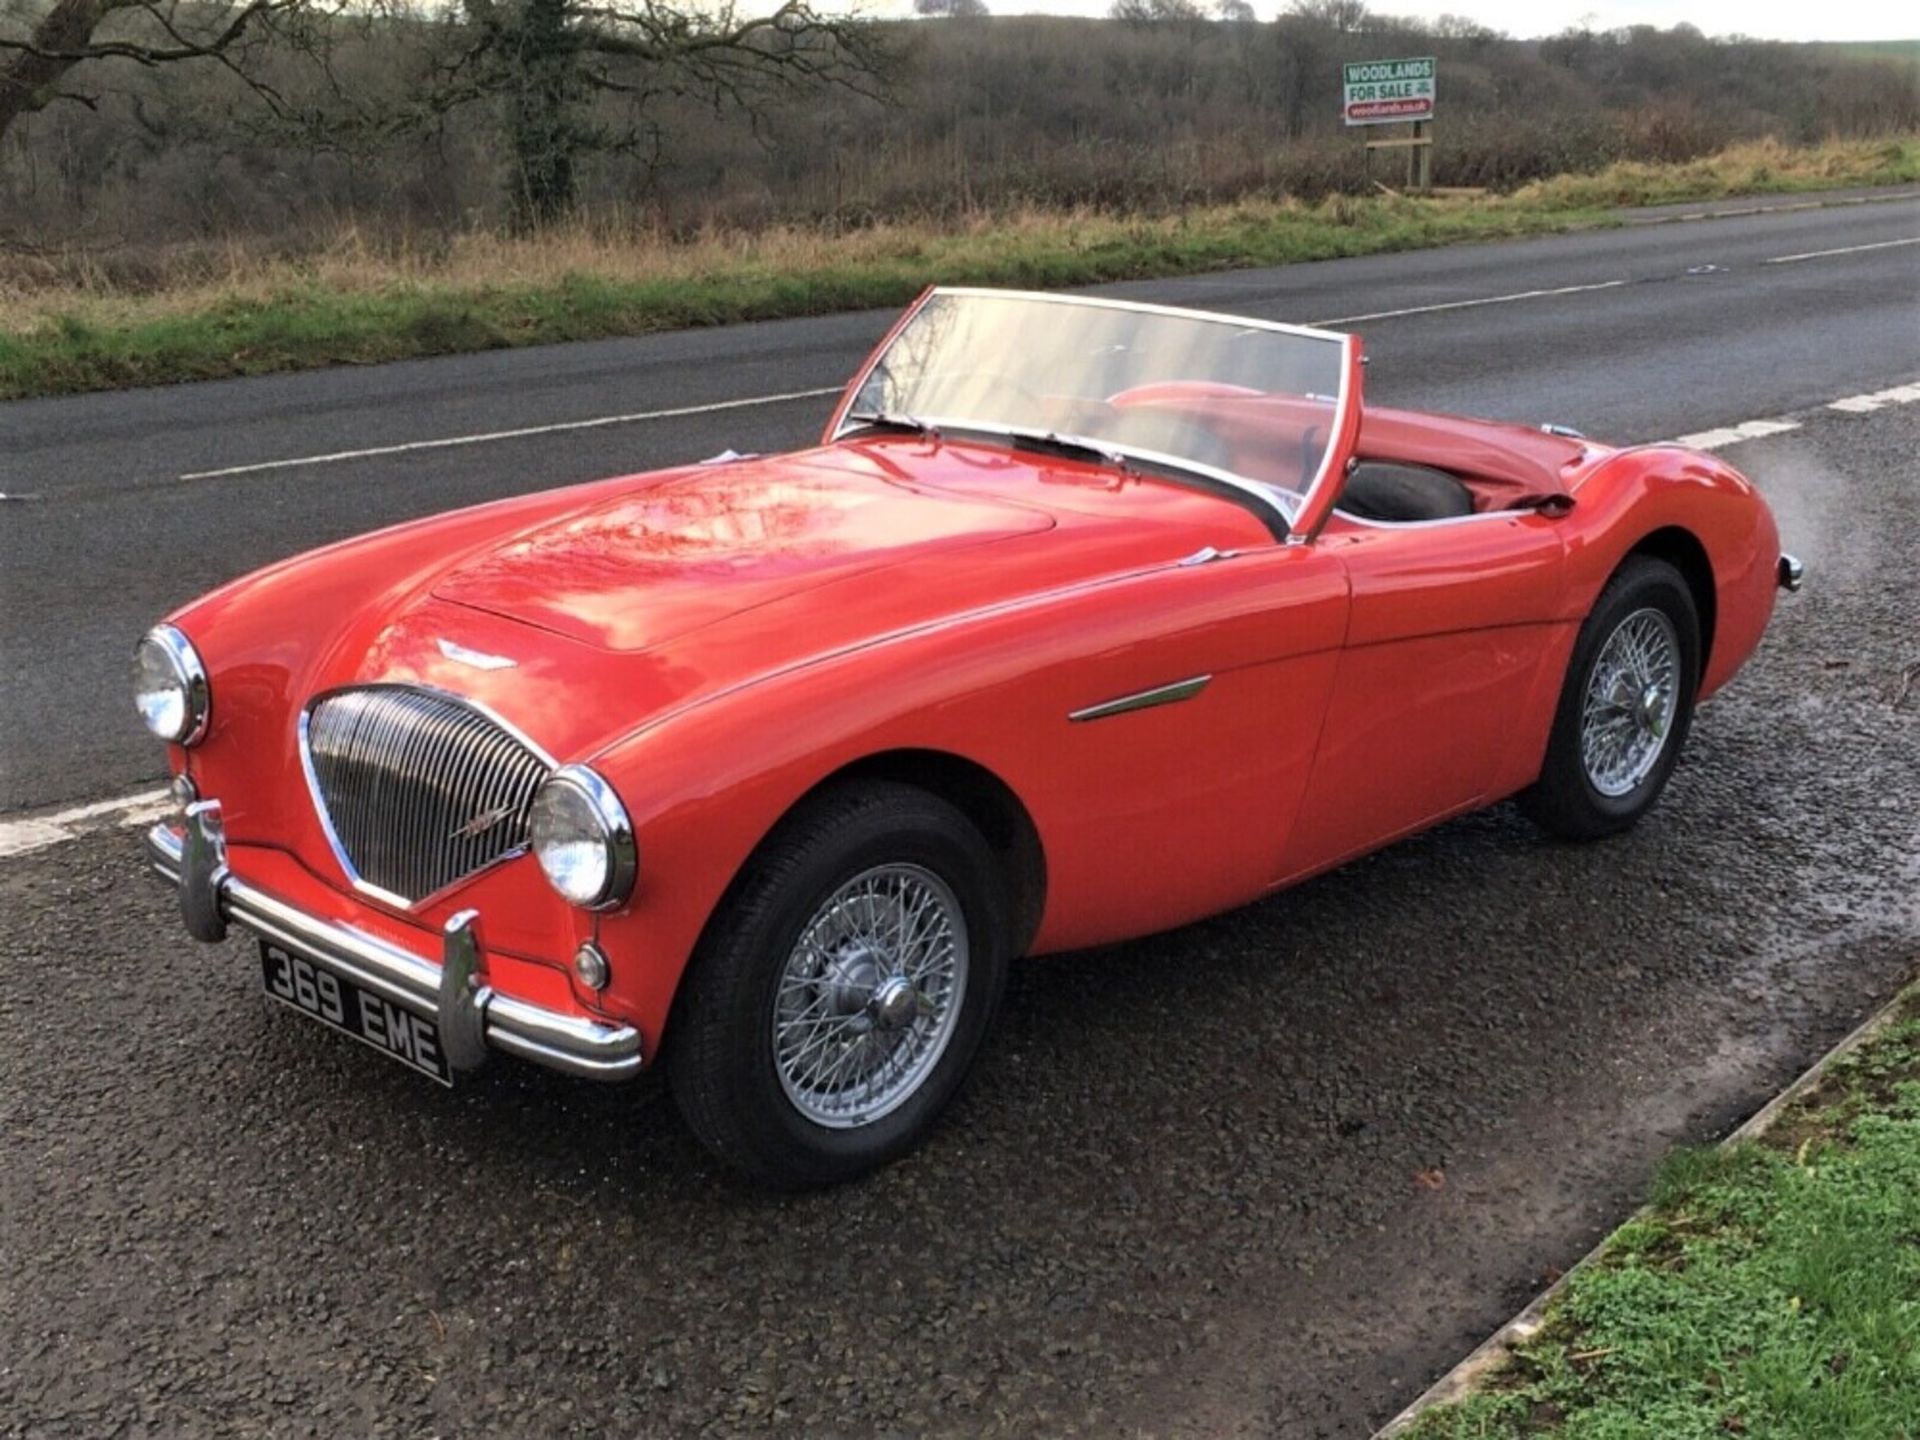 1955 AUSTIN-HEALEY 100/4 Registration Number: 369 EME  Chassis Number: BN1/223234 Recorded